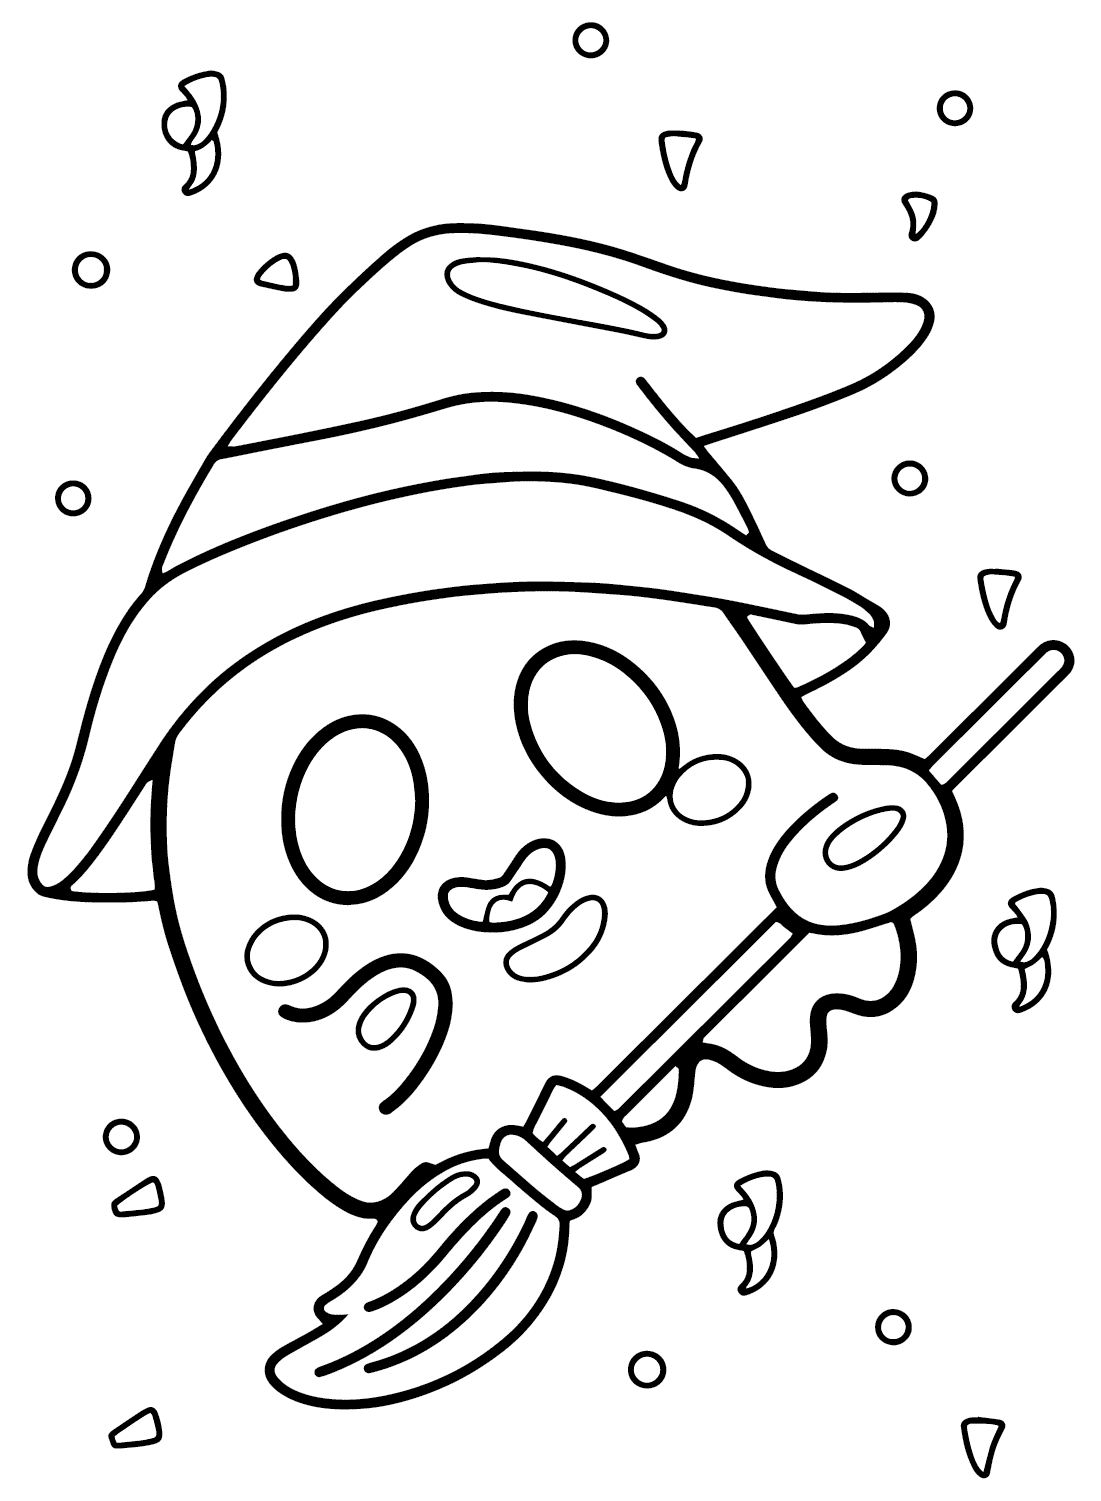 Coloring Pages of Ghost Halloween - Free Printable Coloring Pages